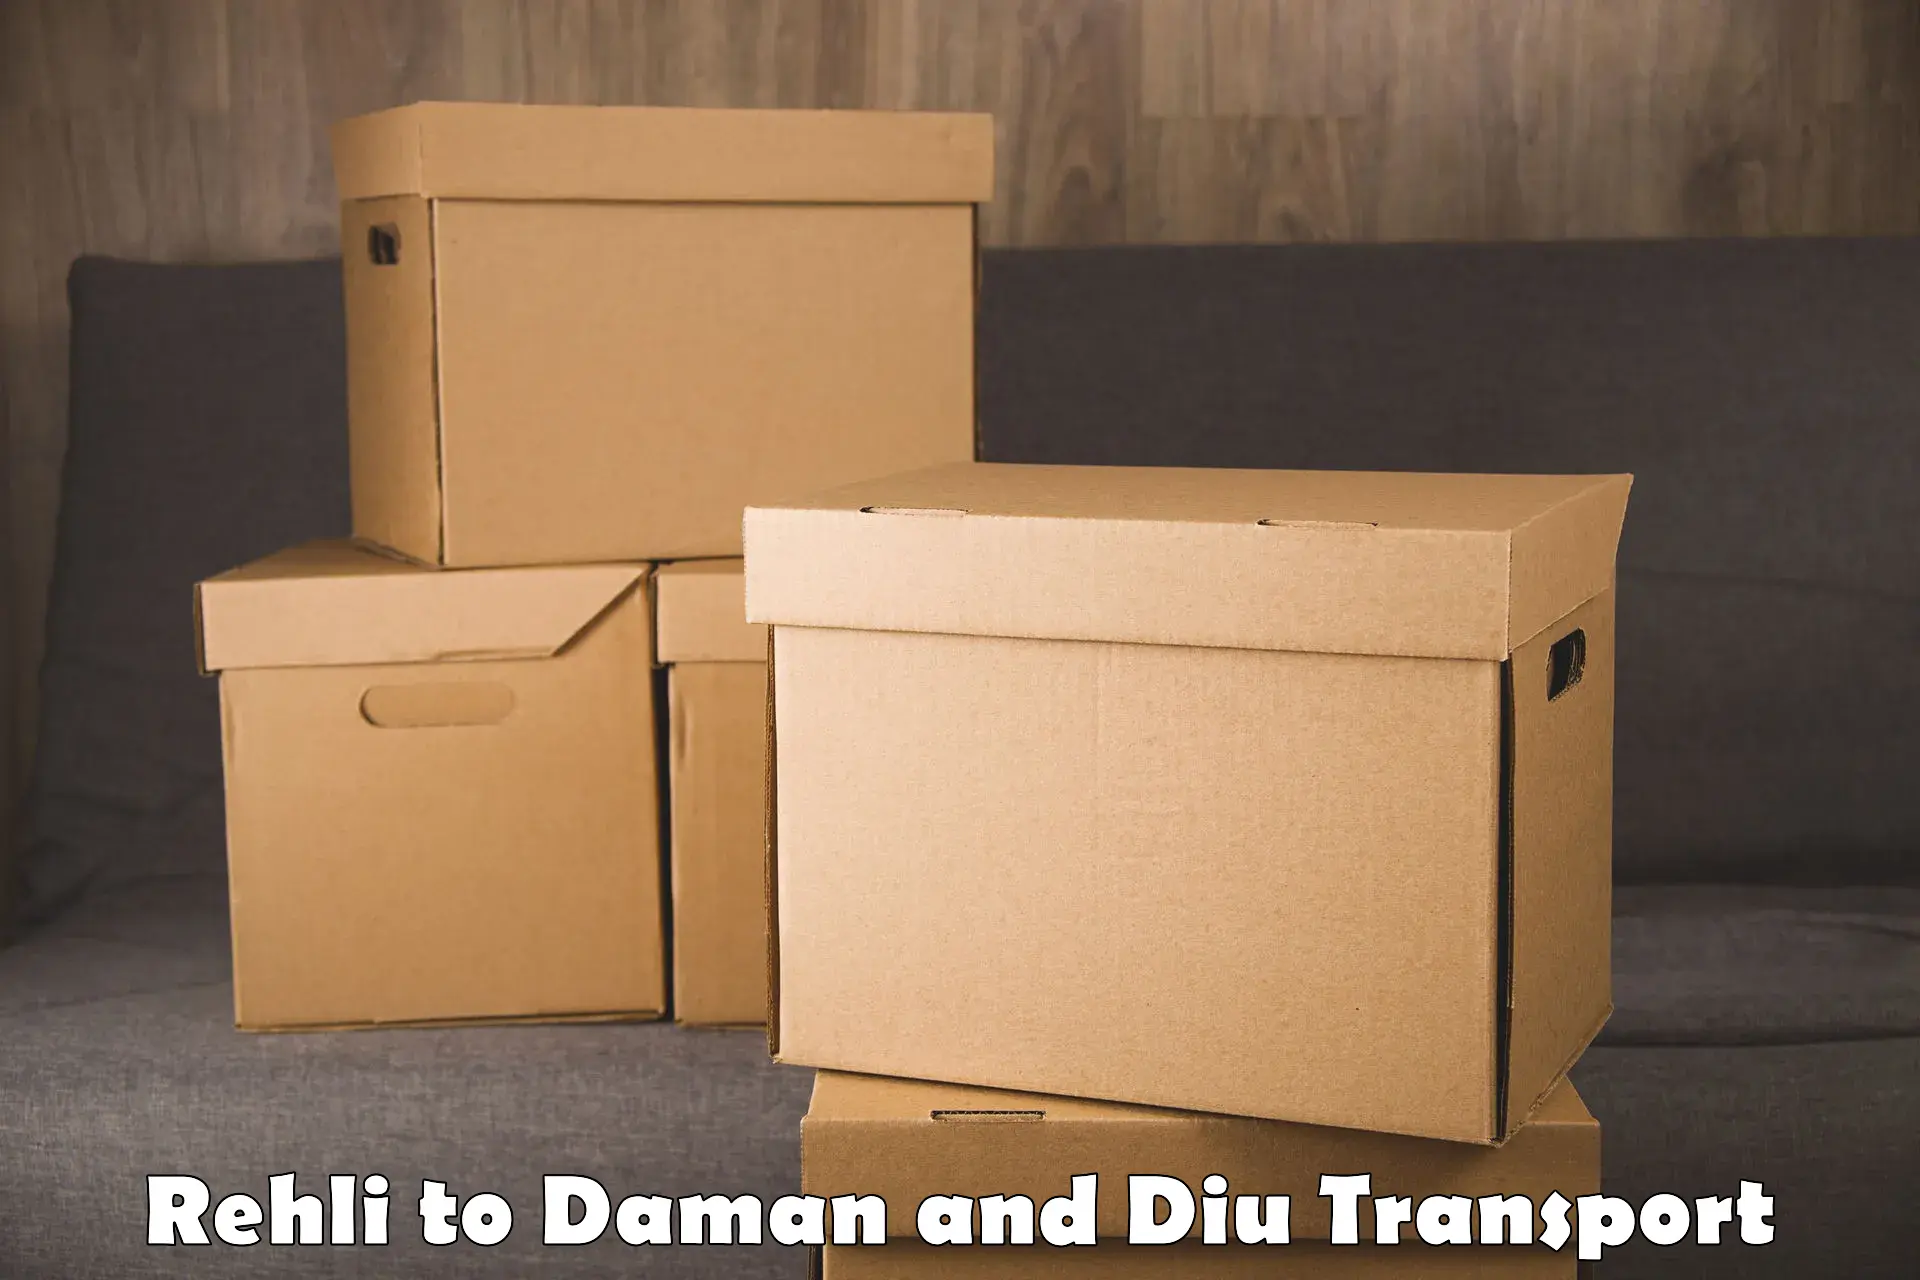 Two wheeler parcel service Rehli to Daman and Diu